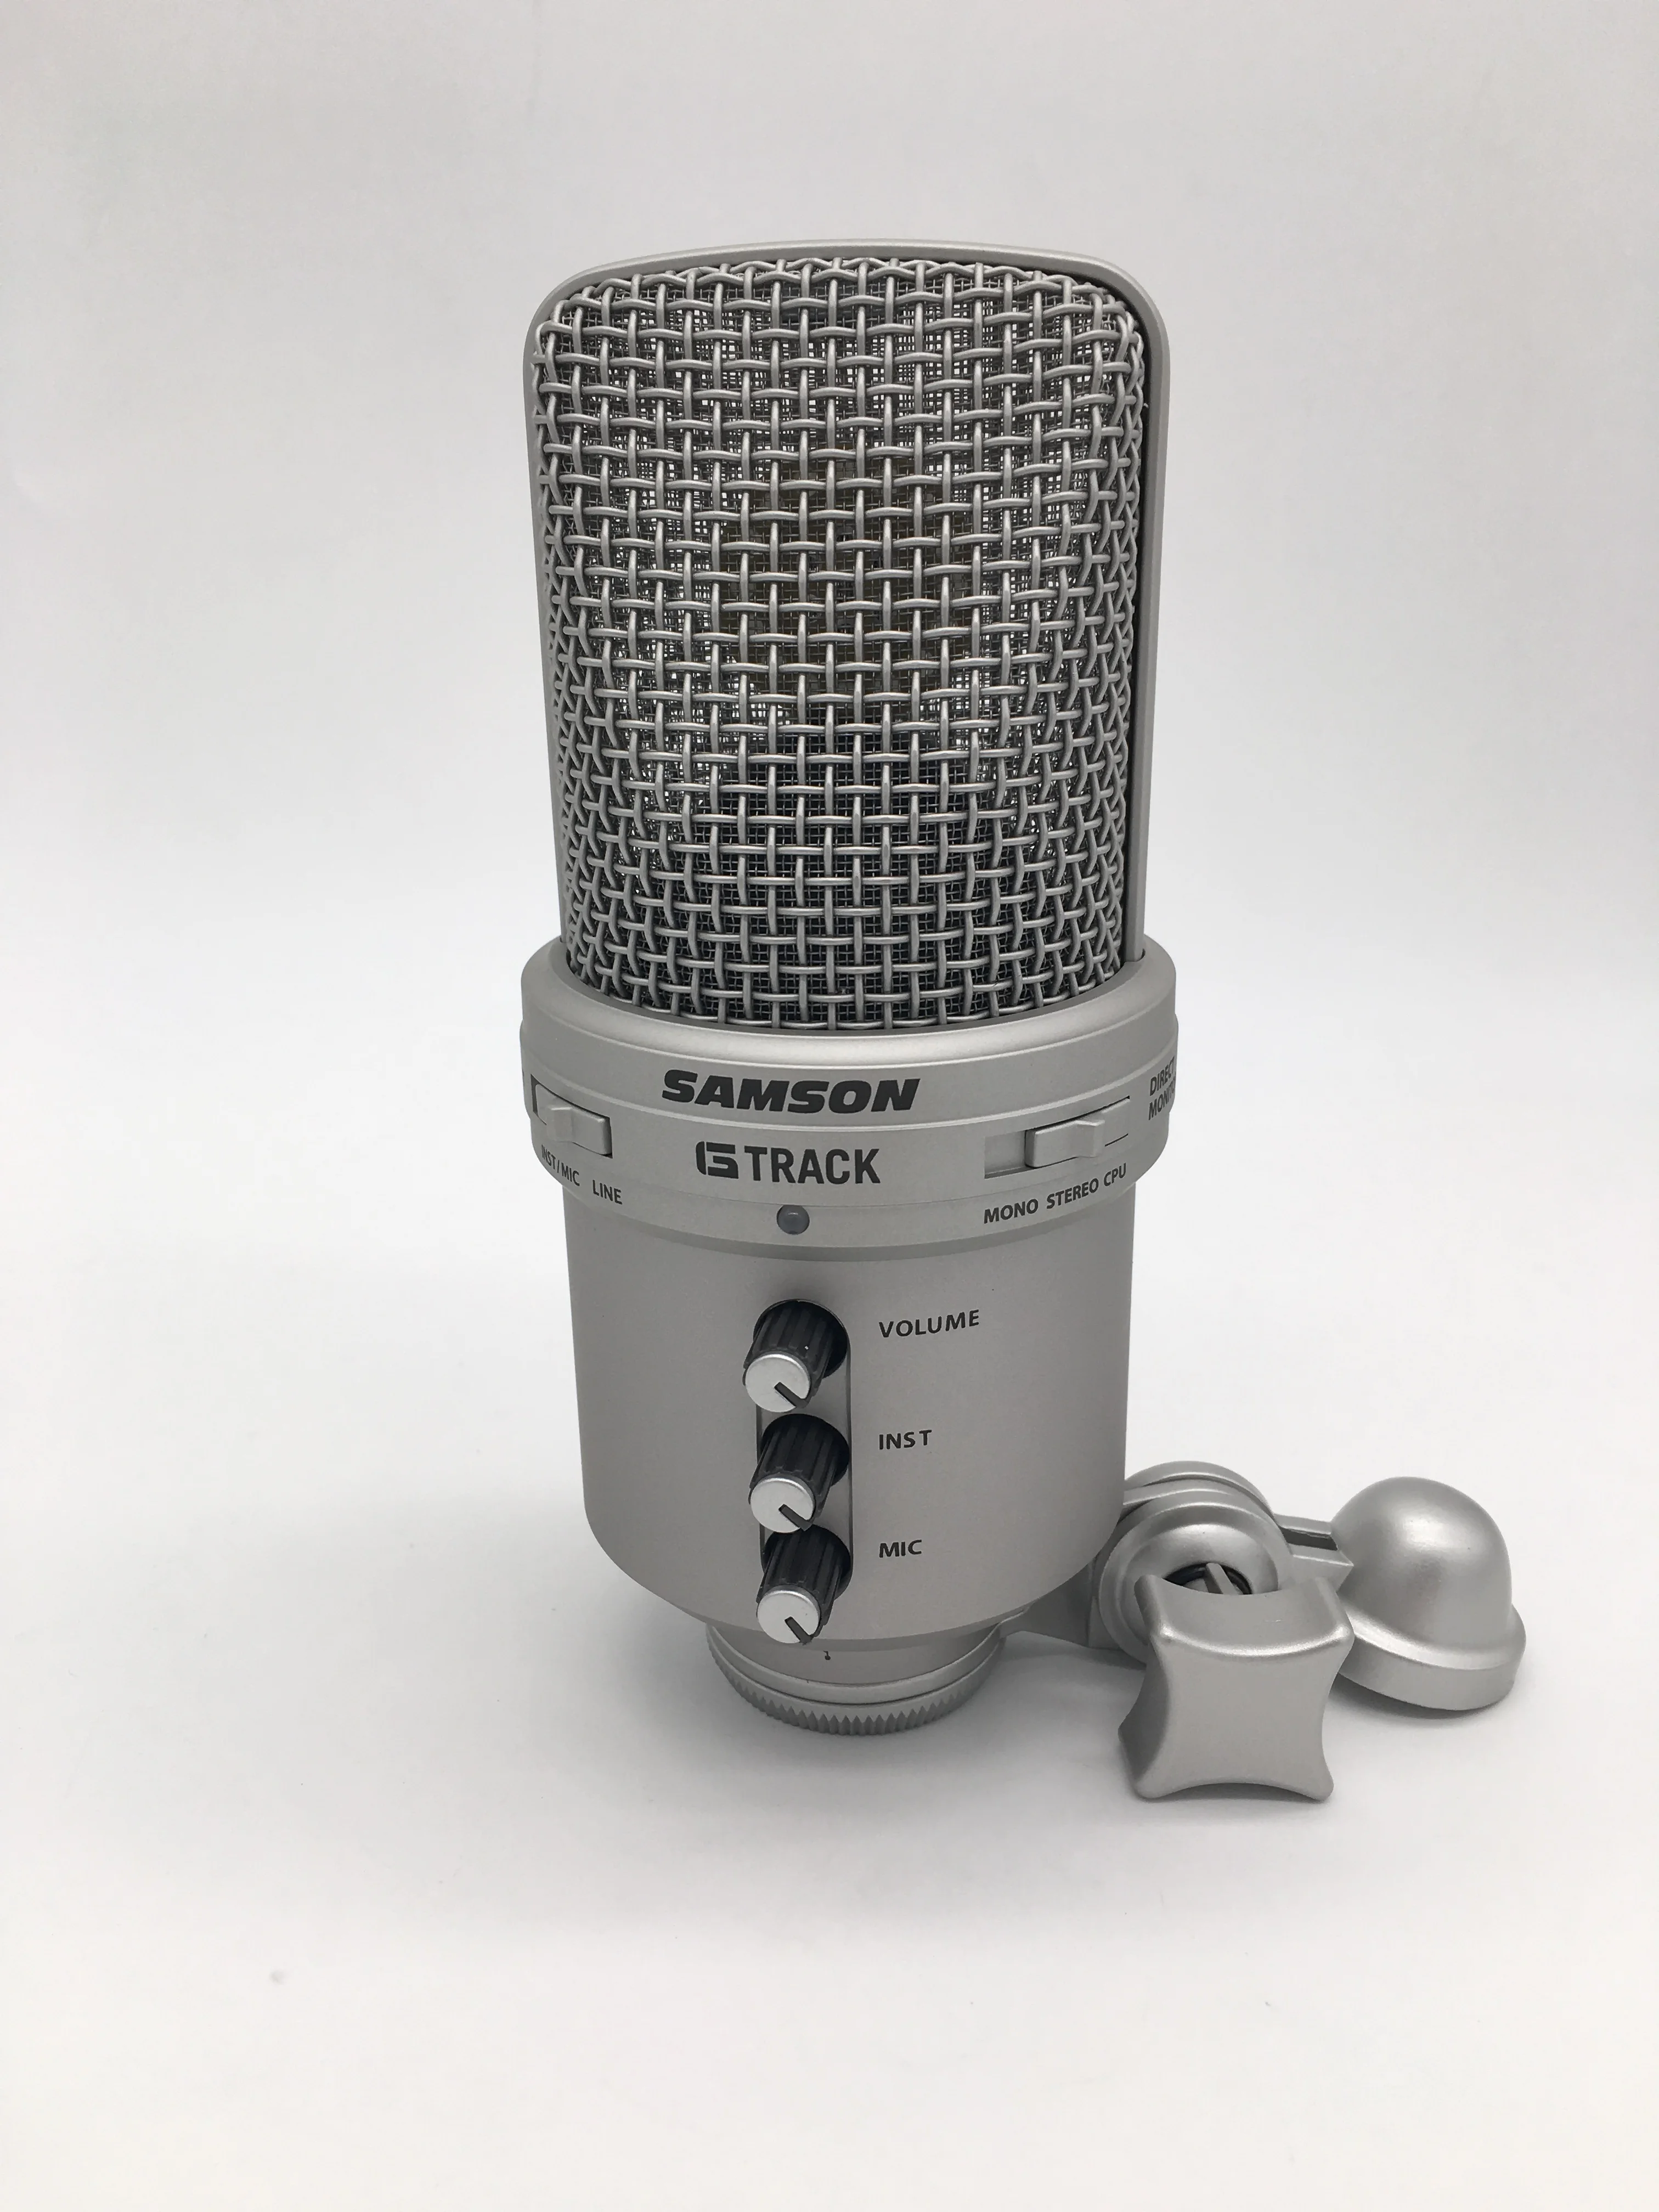 Original SAMSON G Track/GTrack USB Condenser Microphone a built-in sound card and mixer for podcaster/educator _ - AliExpress Mobile